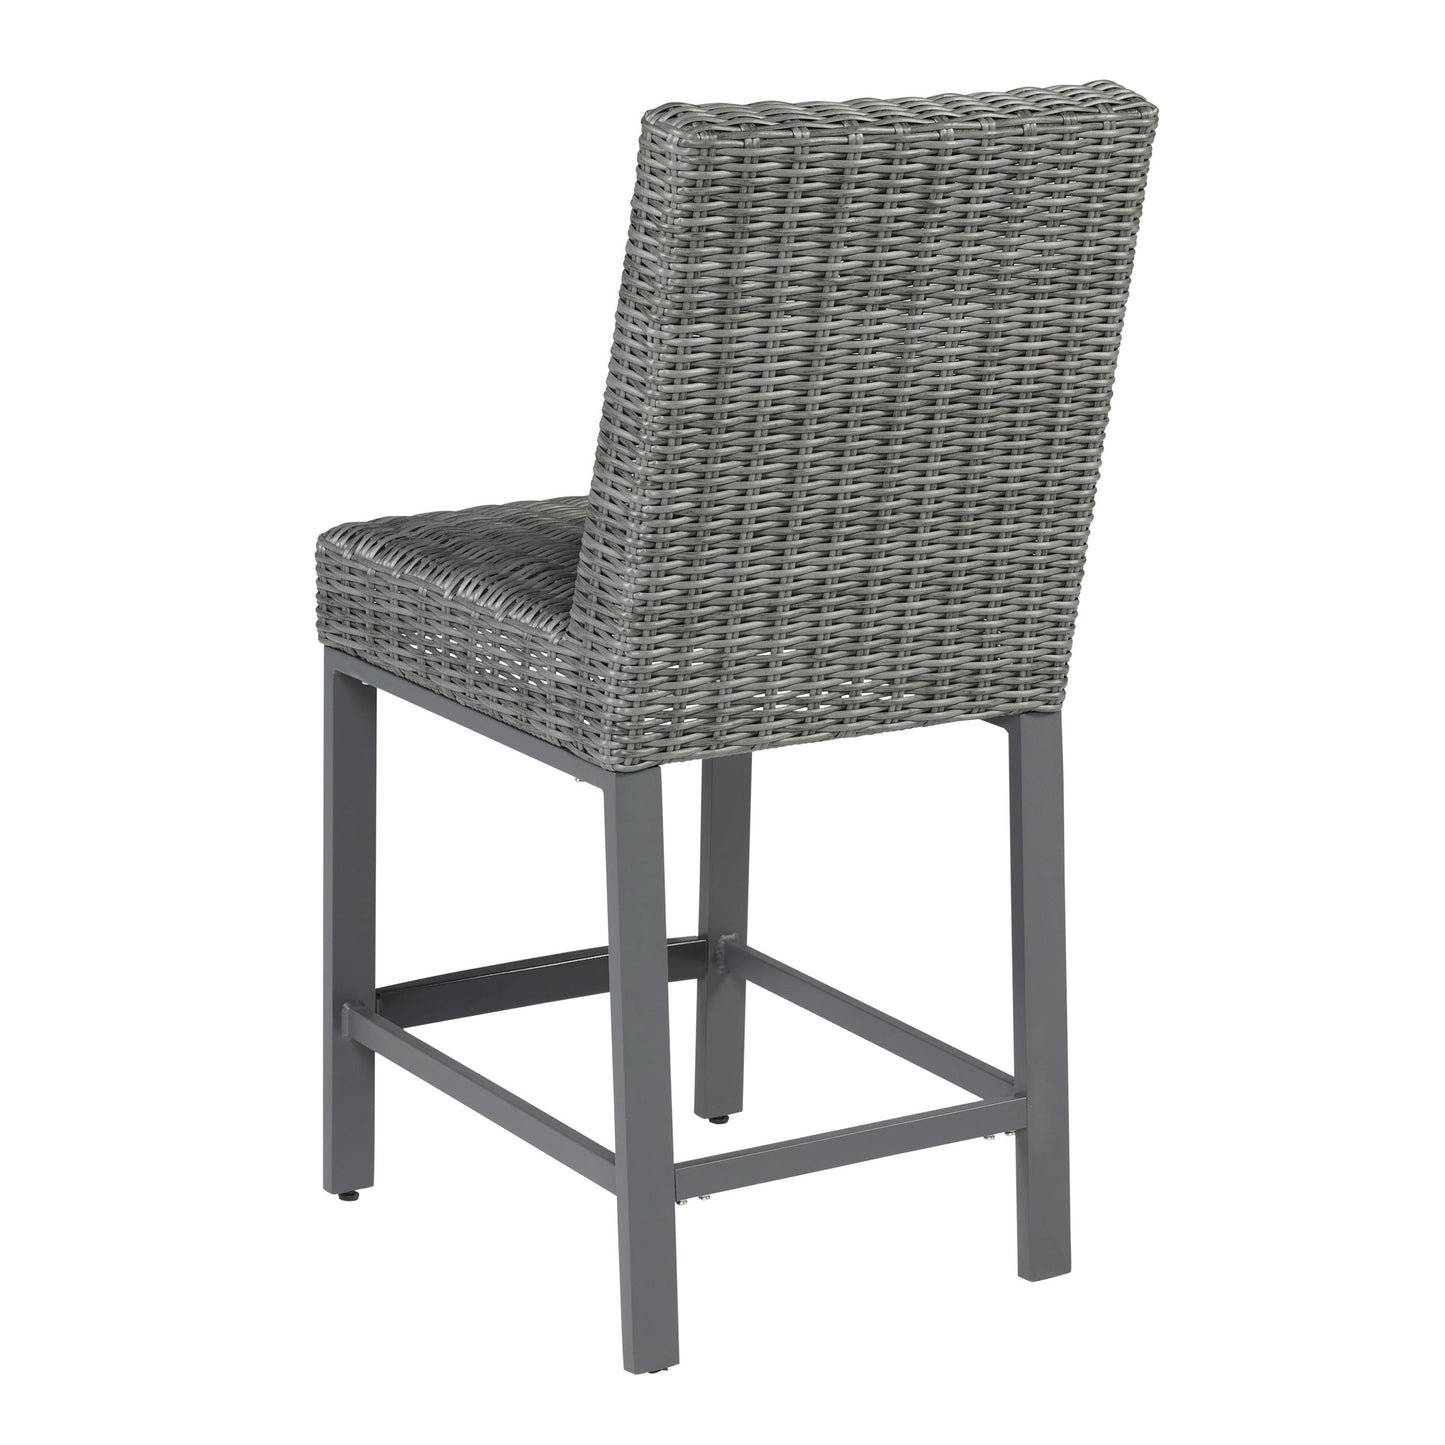 Signature Design by Ashley Outdoor Seating Stools P520-130 IMAGE 4